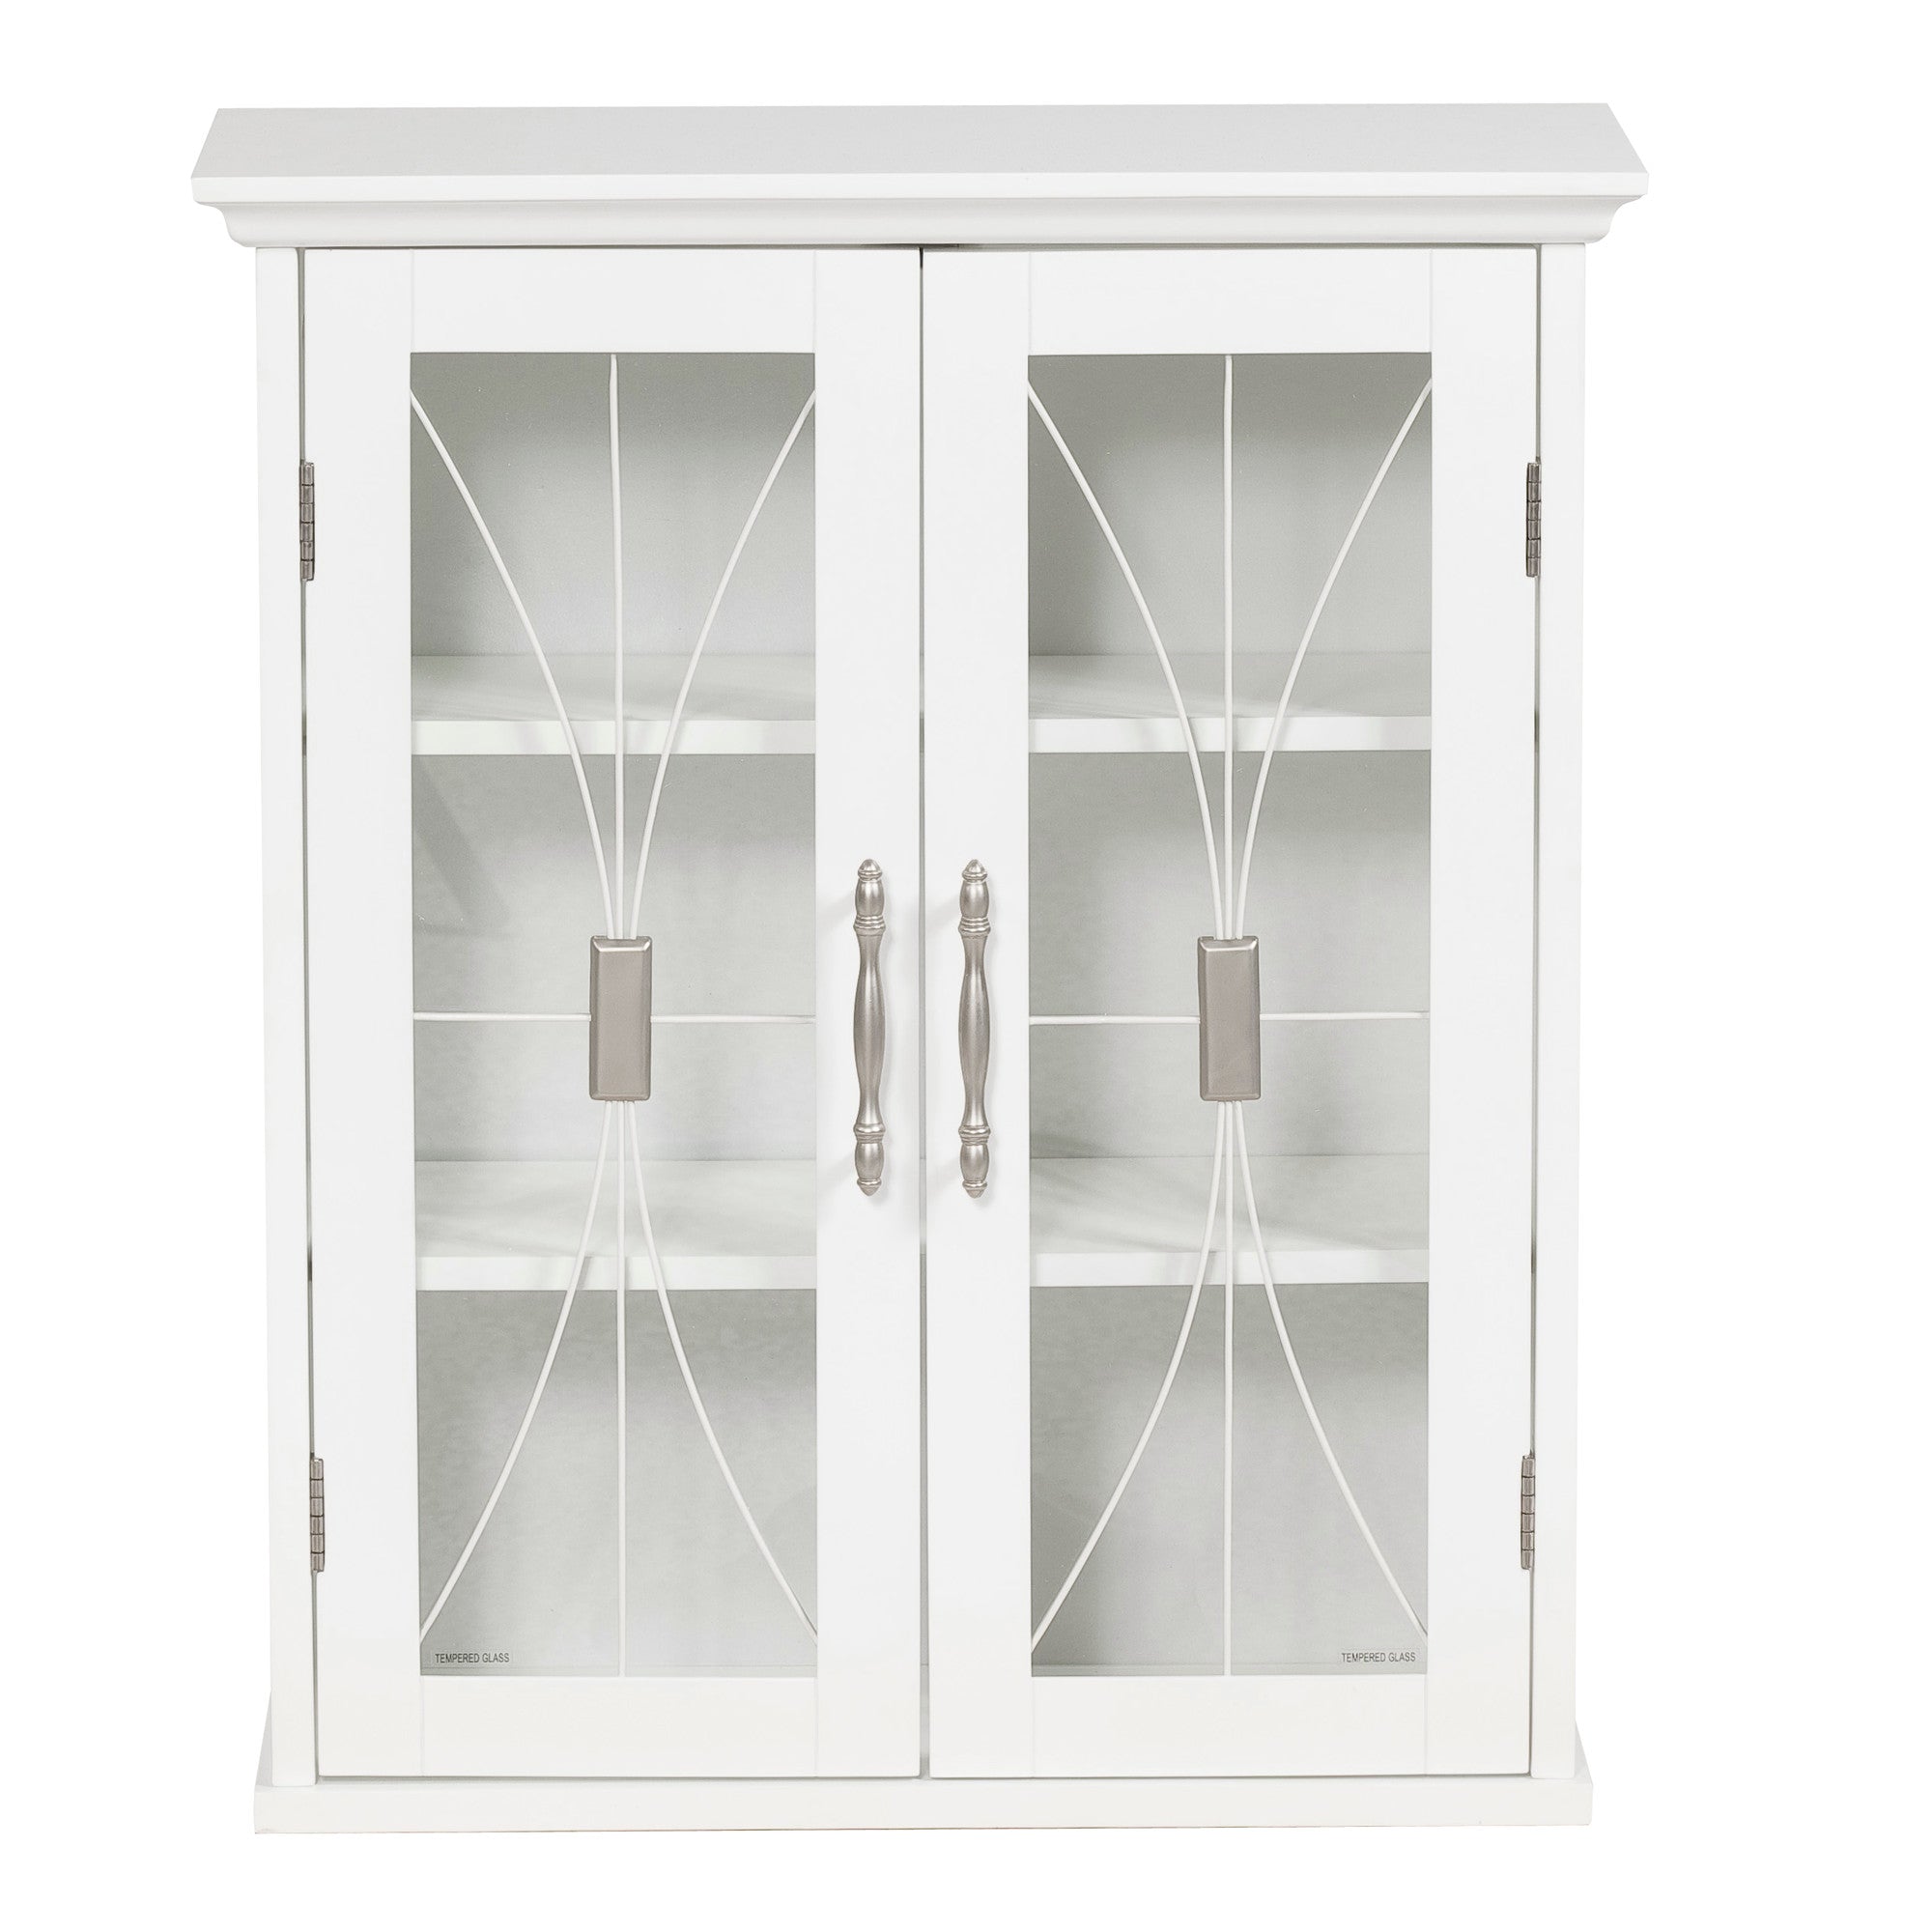 Elegant Home Fashions Delaney Removable Wooden Wall Cabinet with 2 Doors- White